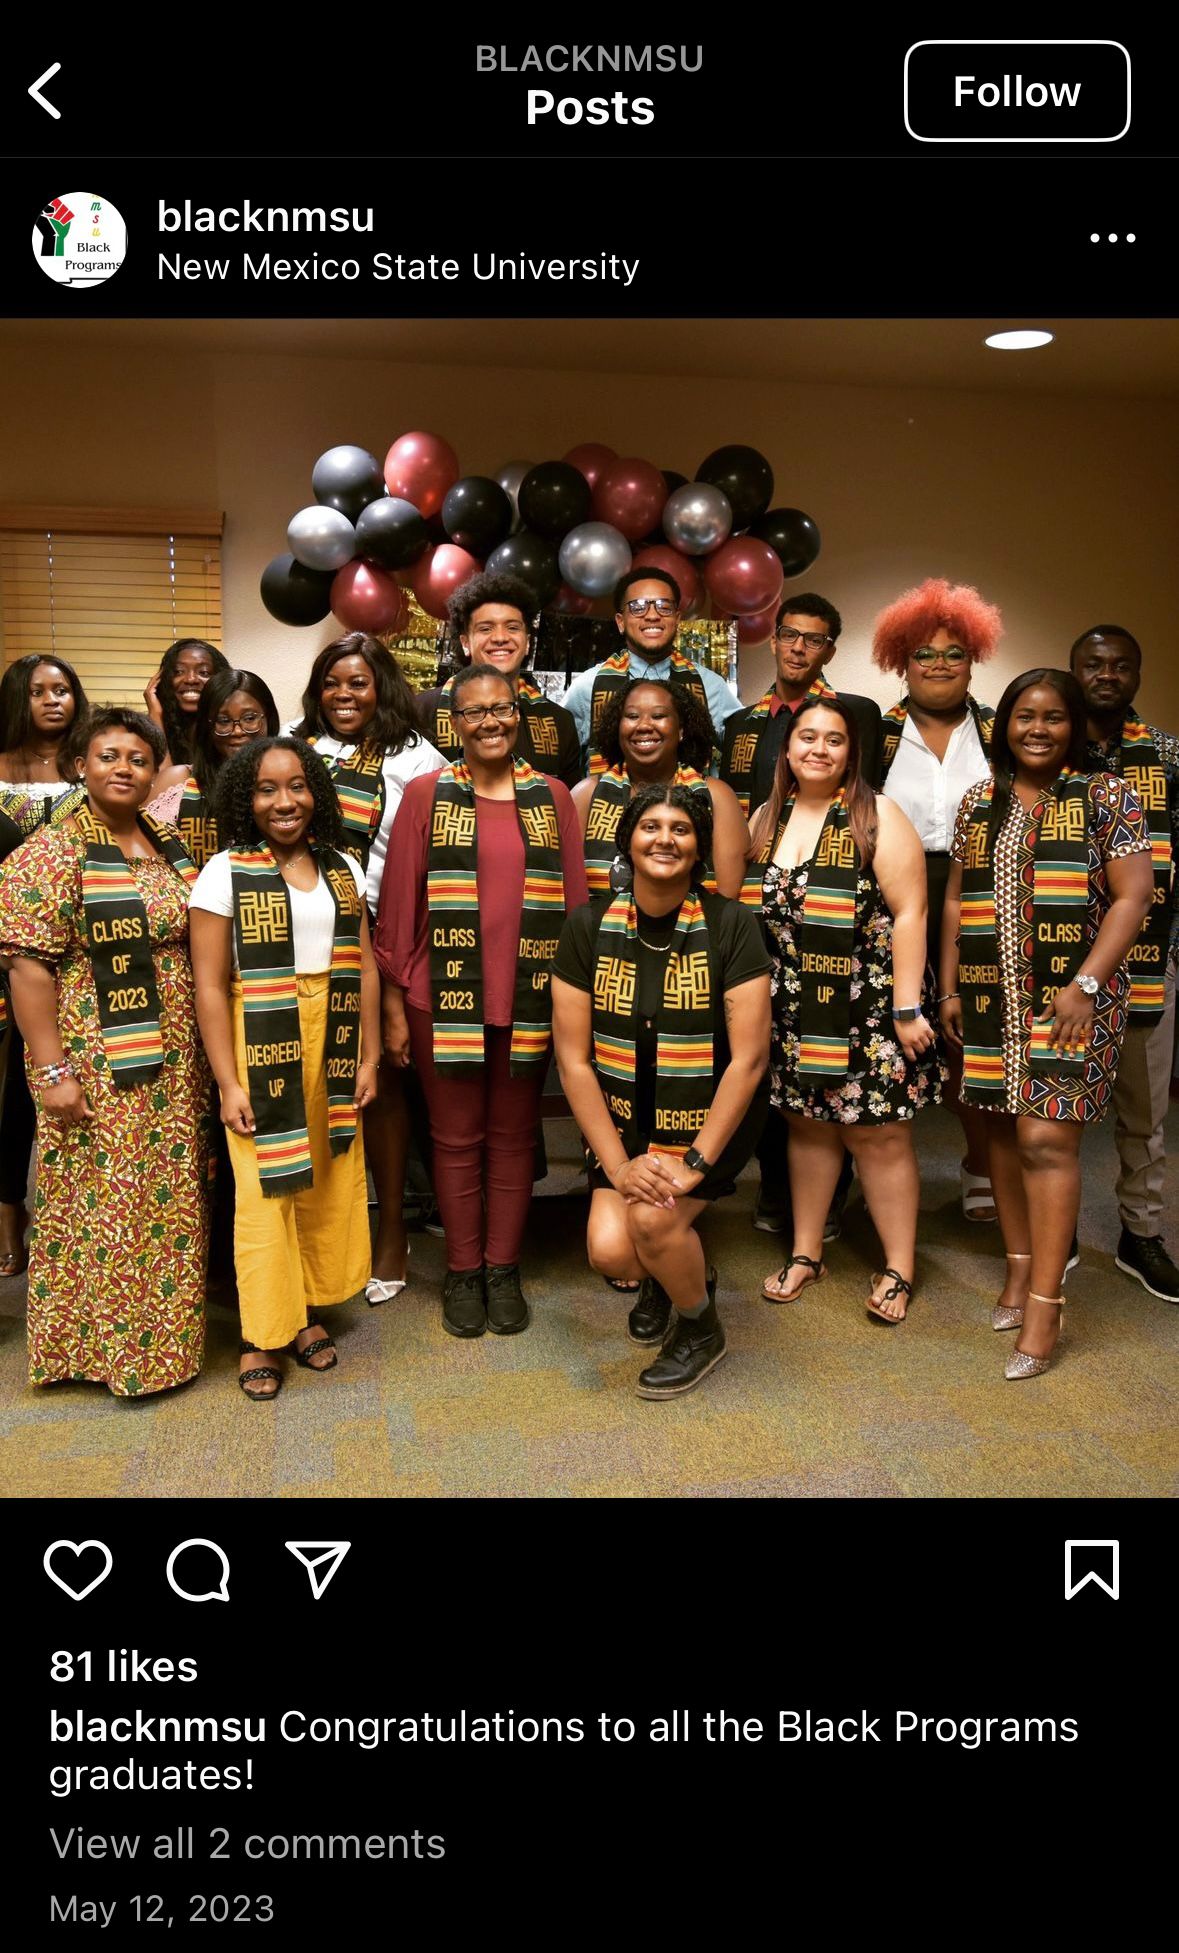 A group of students is posing together in a classroom, celebrating graduation. There are sixteen individuals in the group, comprised of different genders and appearances. They are all dressed in varied, colorful attire. Everyone is wearing a stole with "Class of 2023" and "Degrees of Up" written on it, featuring Afrocentric patterns in green, yellow, and red.  Behind the students, there is a bunch of balloons in metallic colors: black, gold, silver, and maroon, which adds to the celebratory atmosphere. The background includes a partial glimpse of vertical blinds covering a window to the left and a plain wall illuminated by overhead lighting.